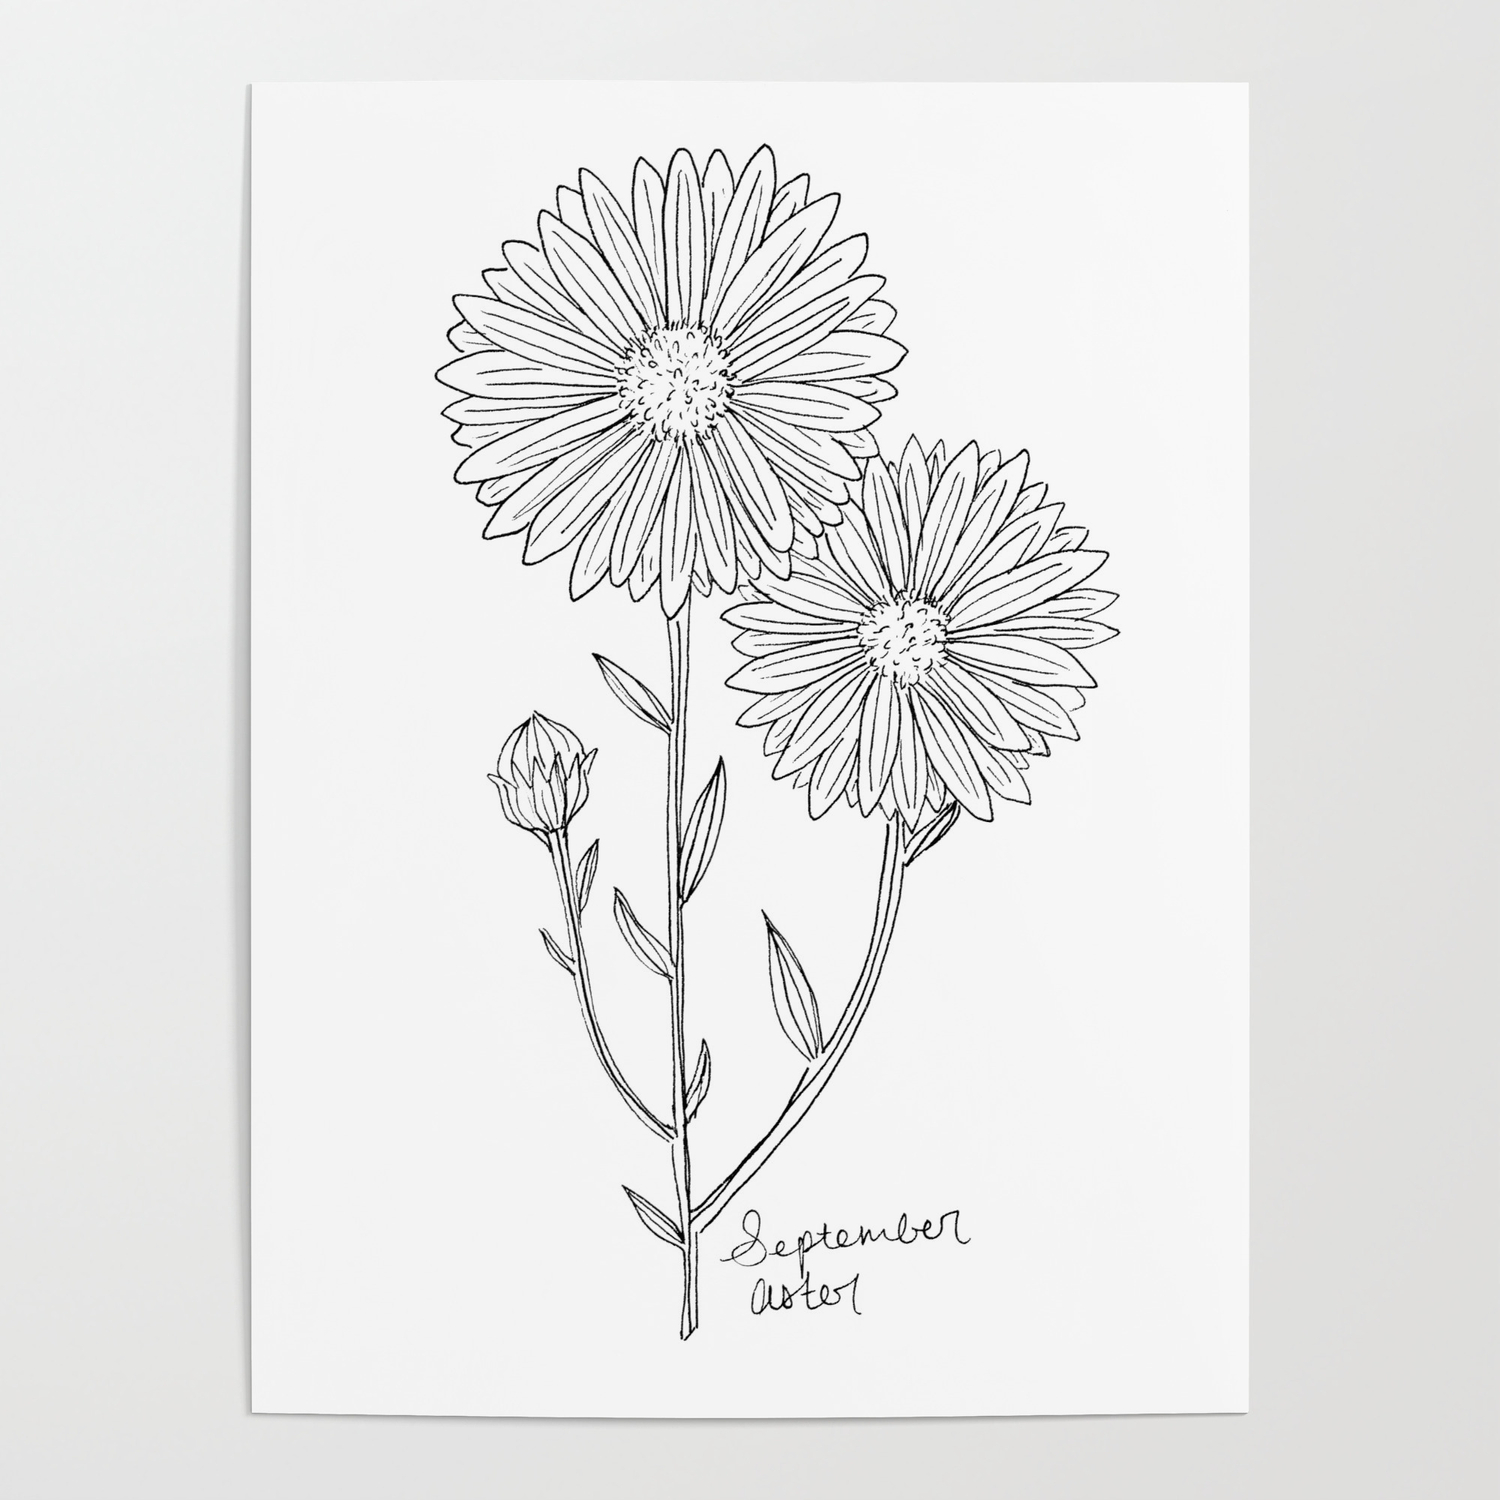 September Birth Flower Aster Ink Drawing Black And White Aster Floral Art Poster By Lauramax Society6